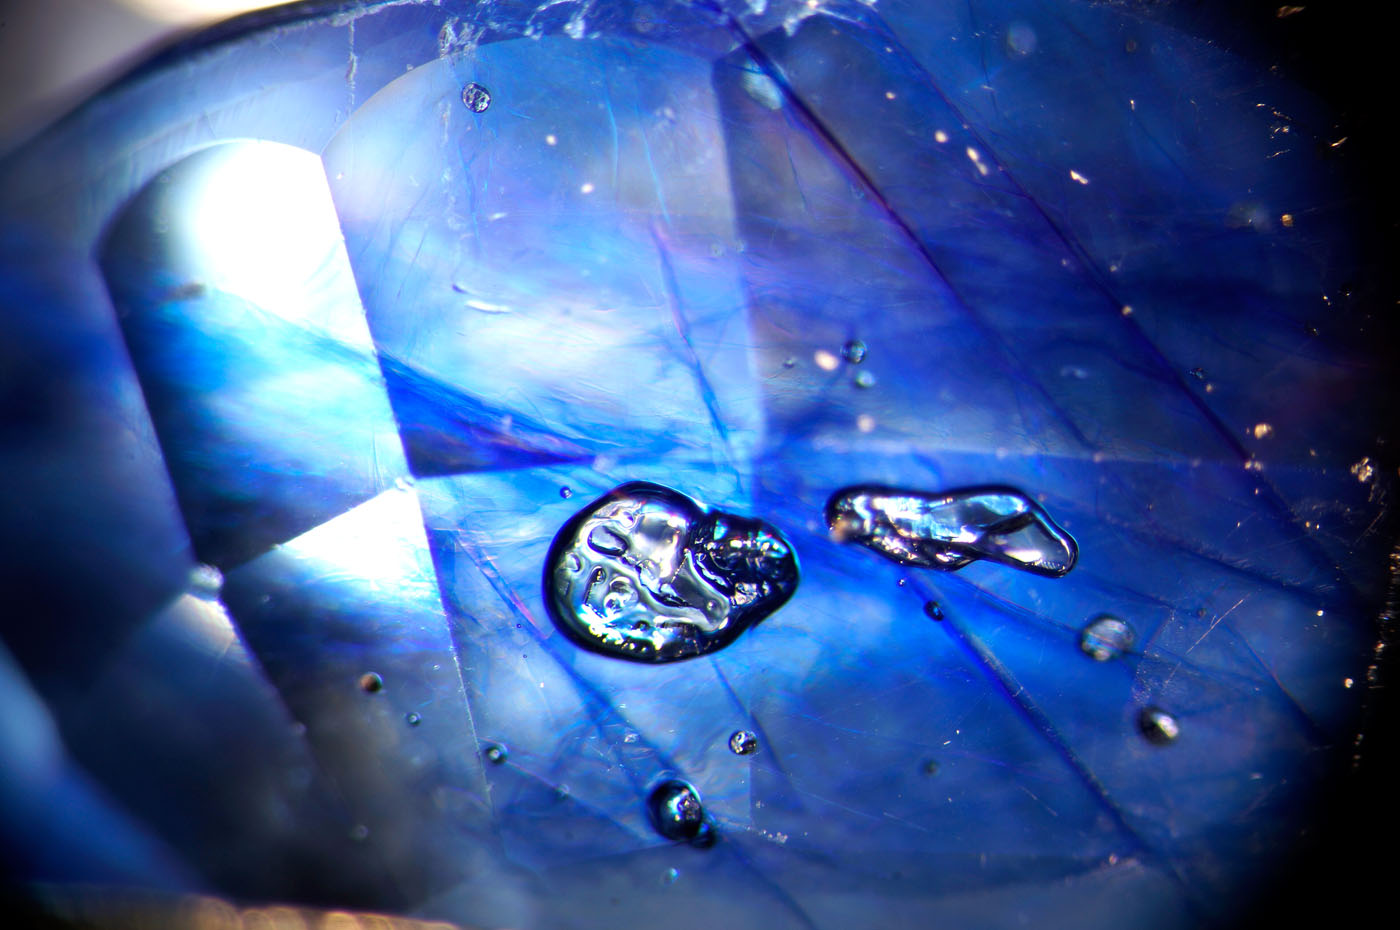 Figure 8. Flattened gas bubbles stand out in high relief in the glass filler of this cobalt-glass filled sapphire. Oblique fiber-optic illumination. Photo: Wimon Manorotkul